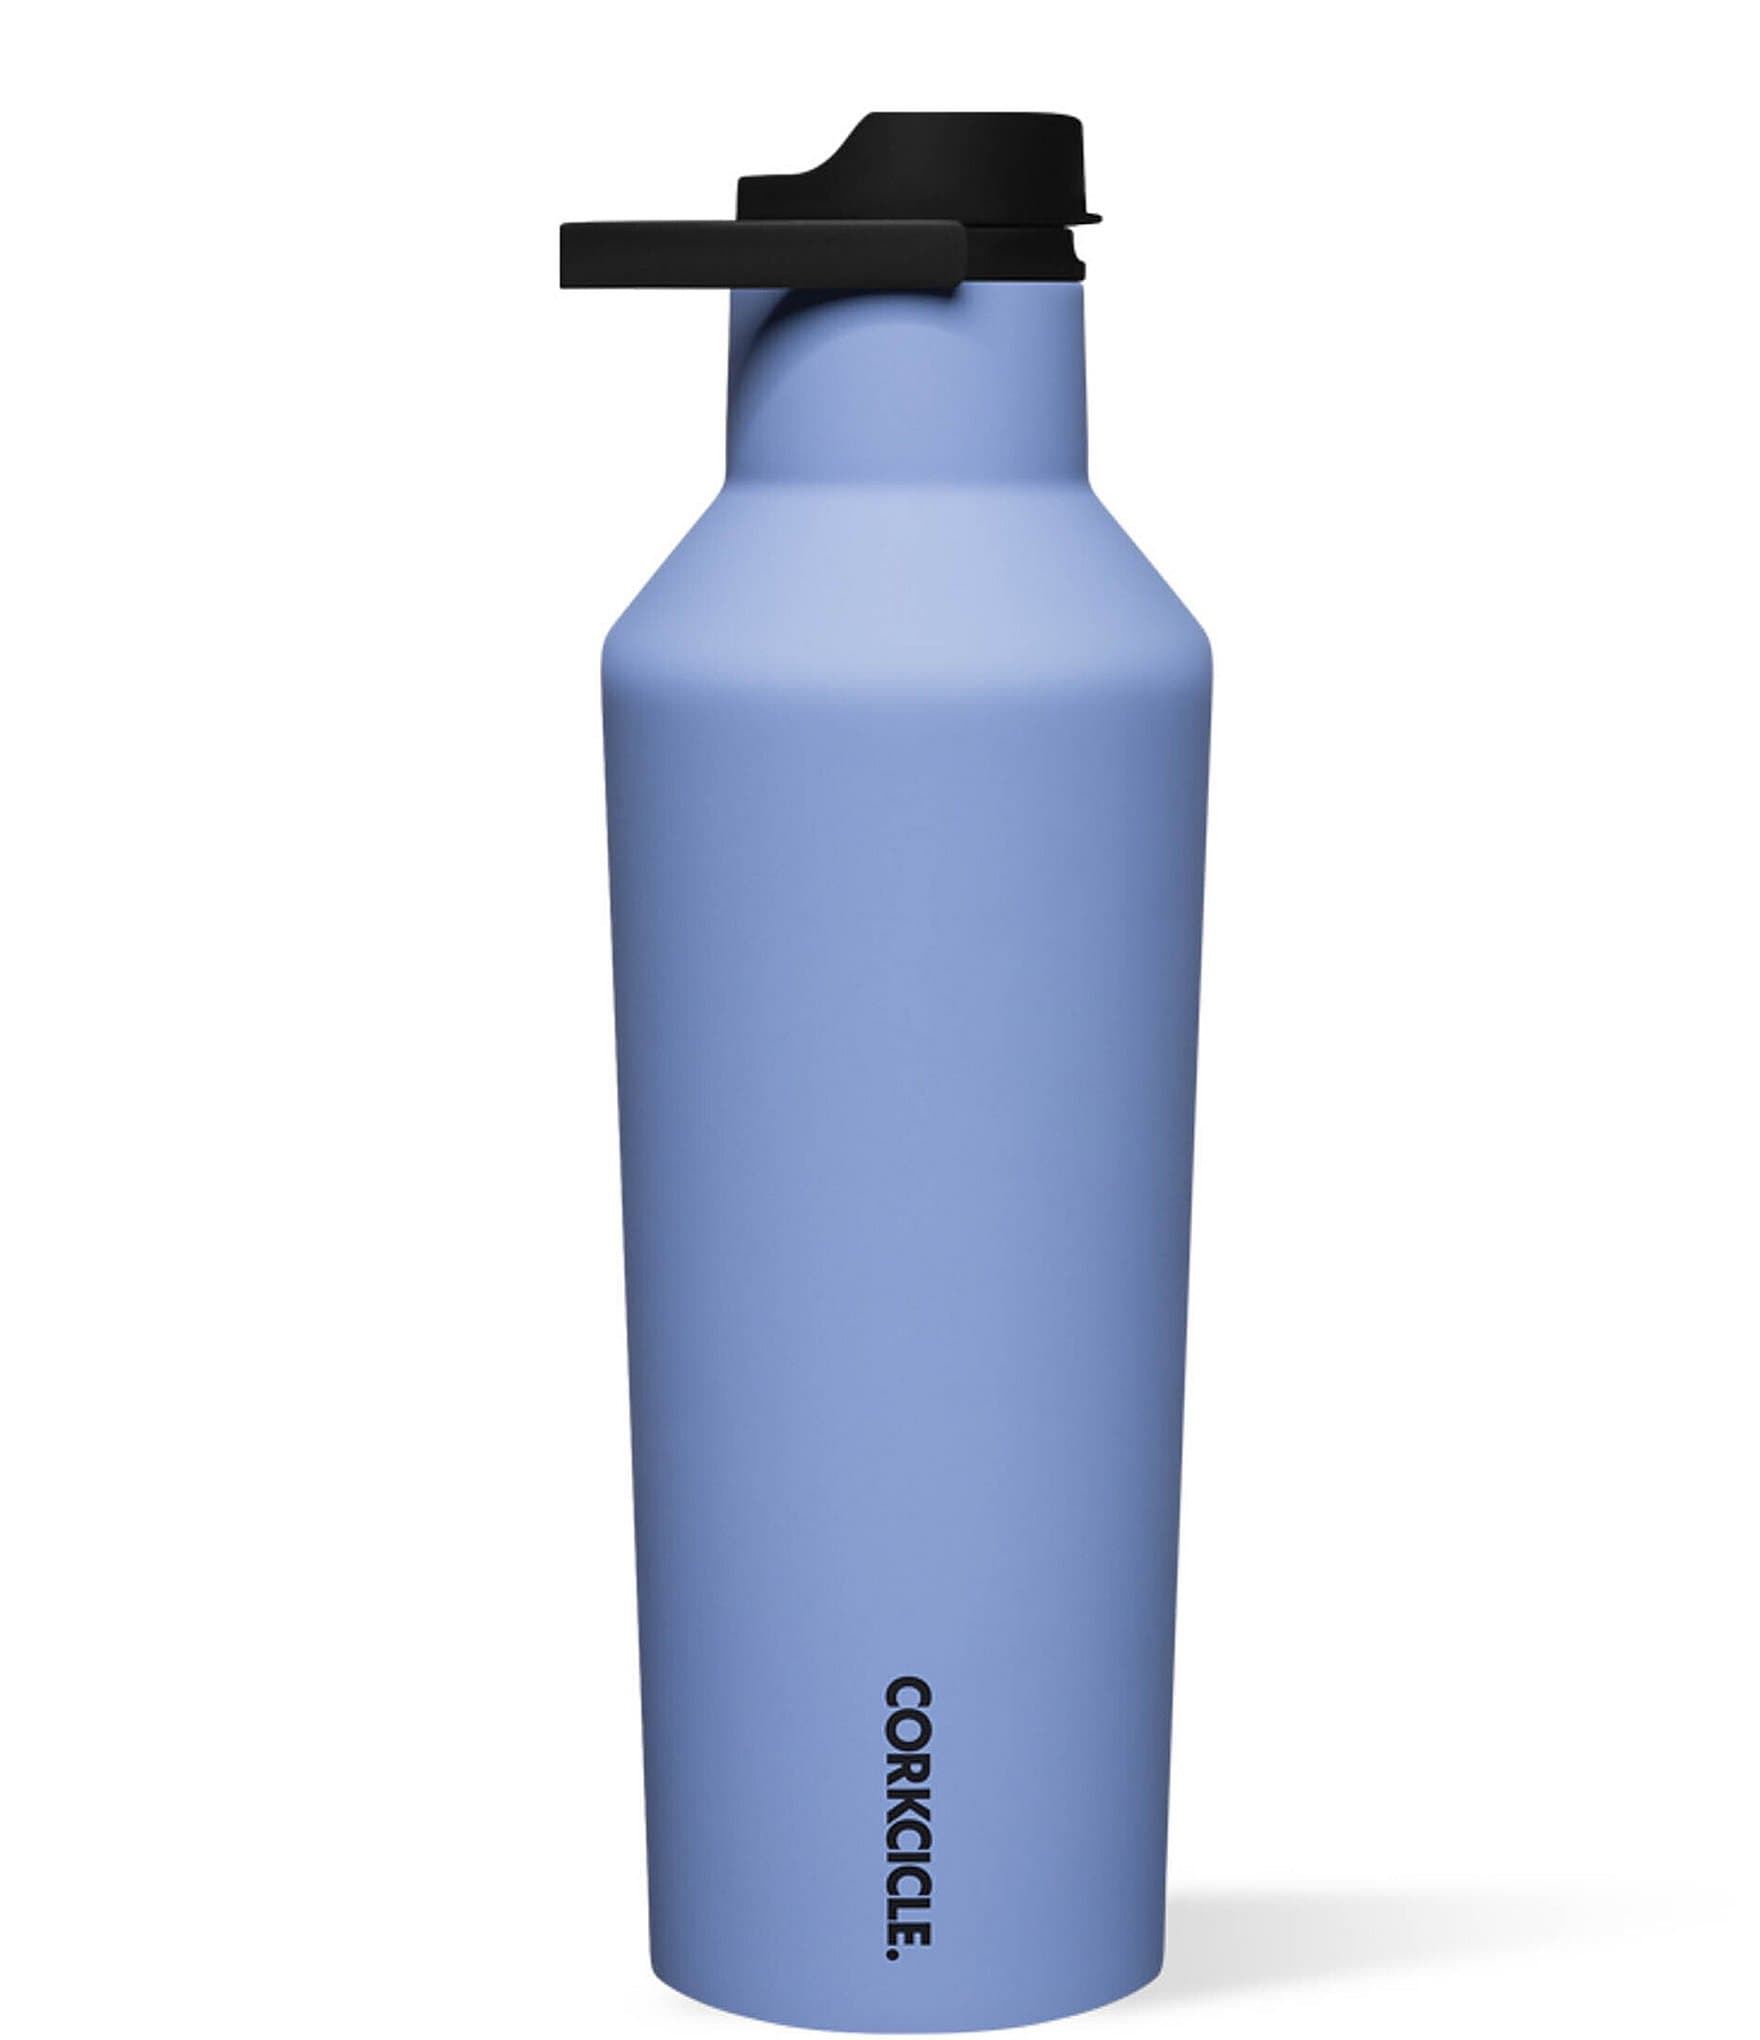 https://dimg.dillards.com/is/image/DillardsZoom/zoom/corkcicle-triple-insulated-series-a-sport-canteen-32-oz/00000000_zi_18f8cb29-b1a6-4f34-b46f-c2ee6b67610c.jpg